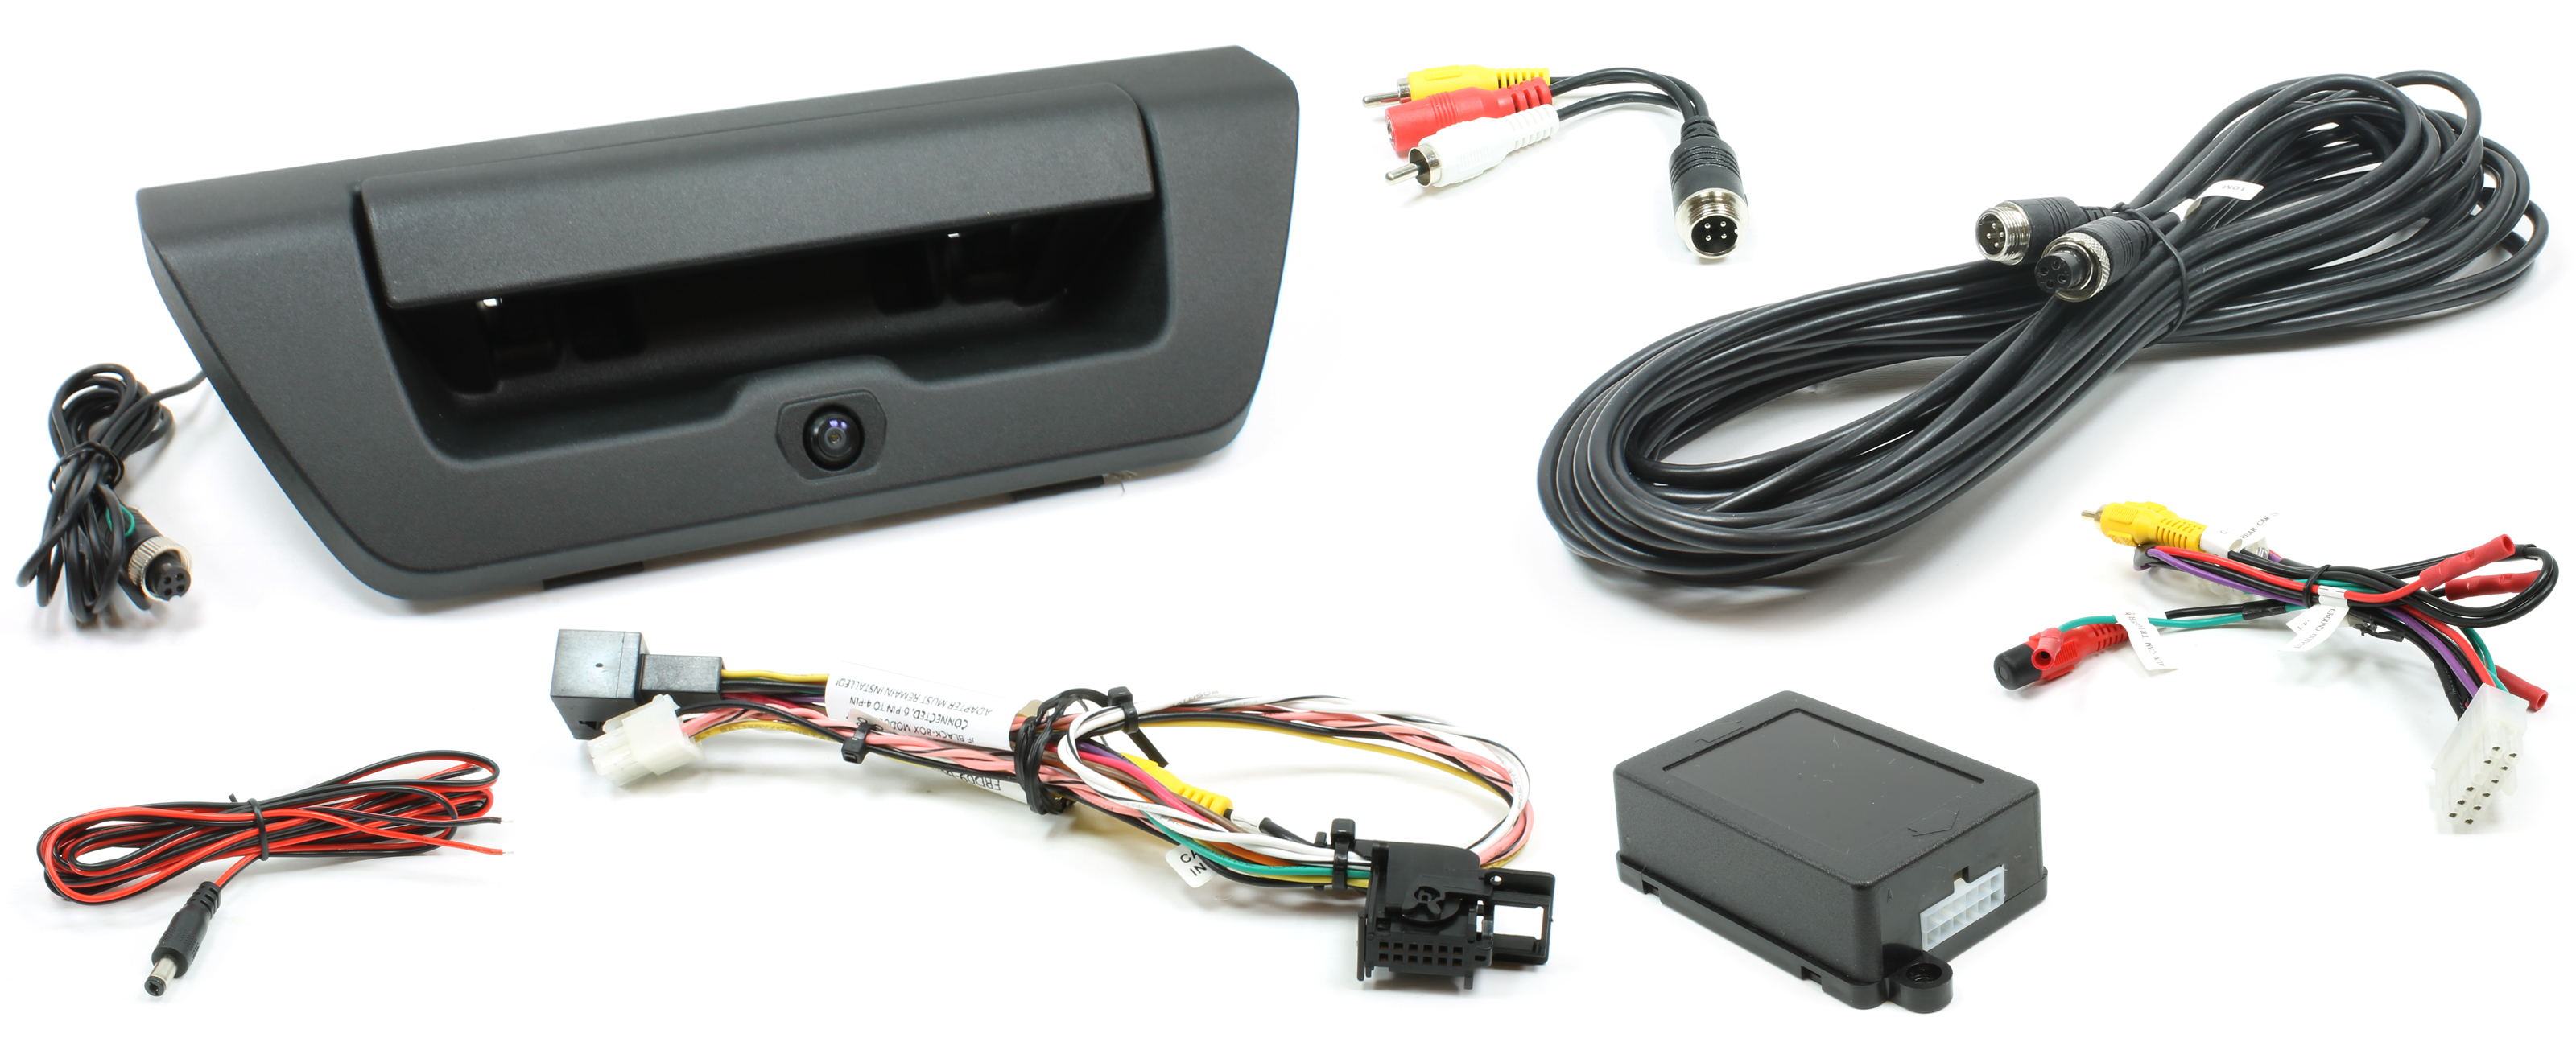 2015-2017 Ford F150 tailgate handle camera with video module for 4.2-inch screens